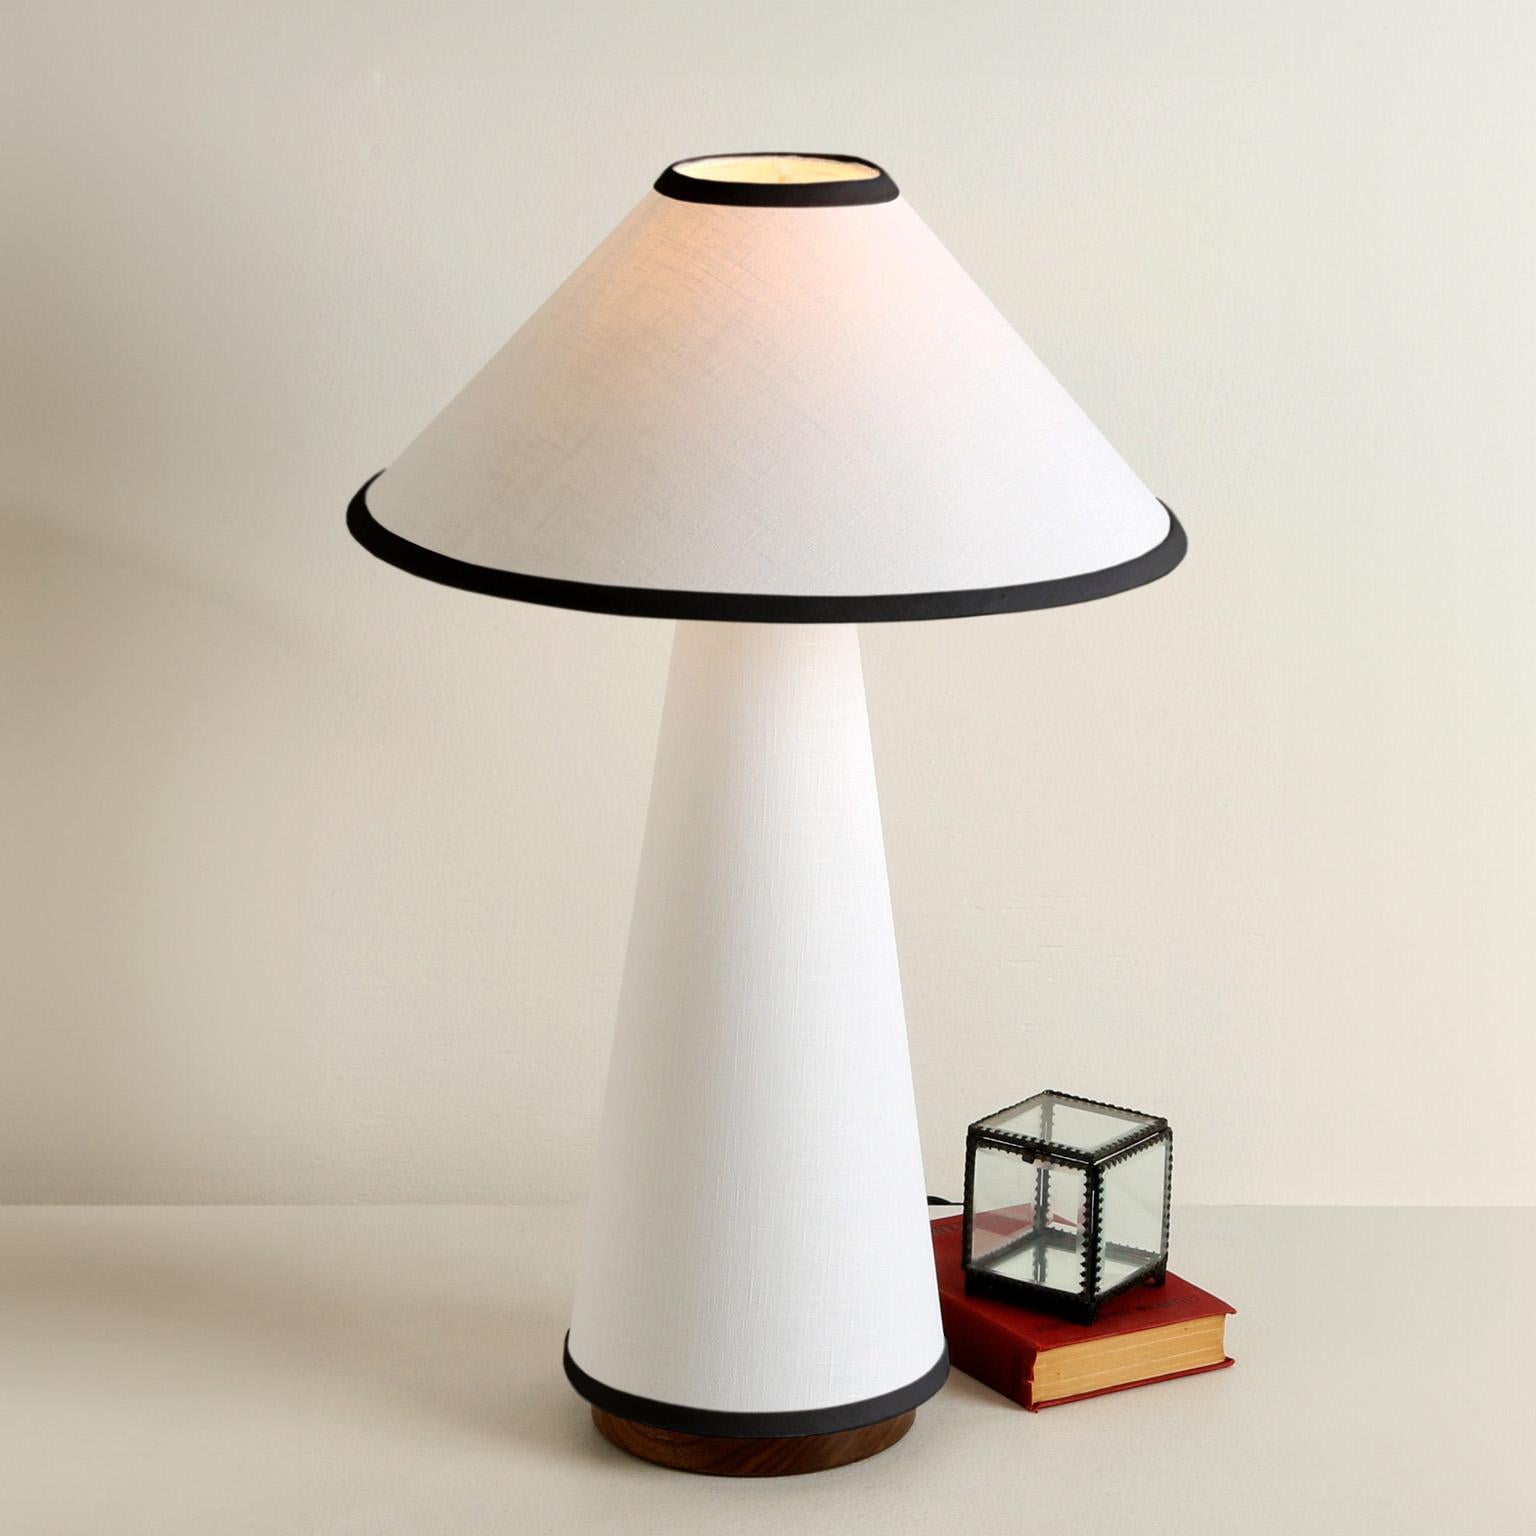 Our contemporary Linden Table Lamp with a narrower 16